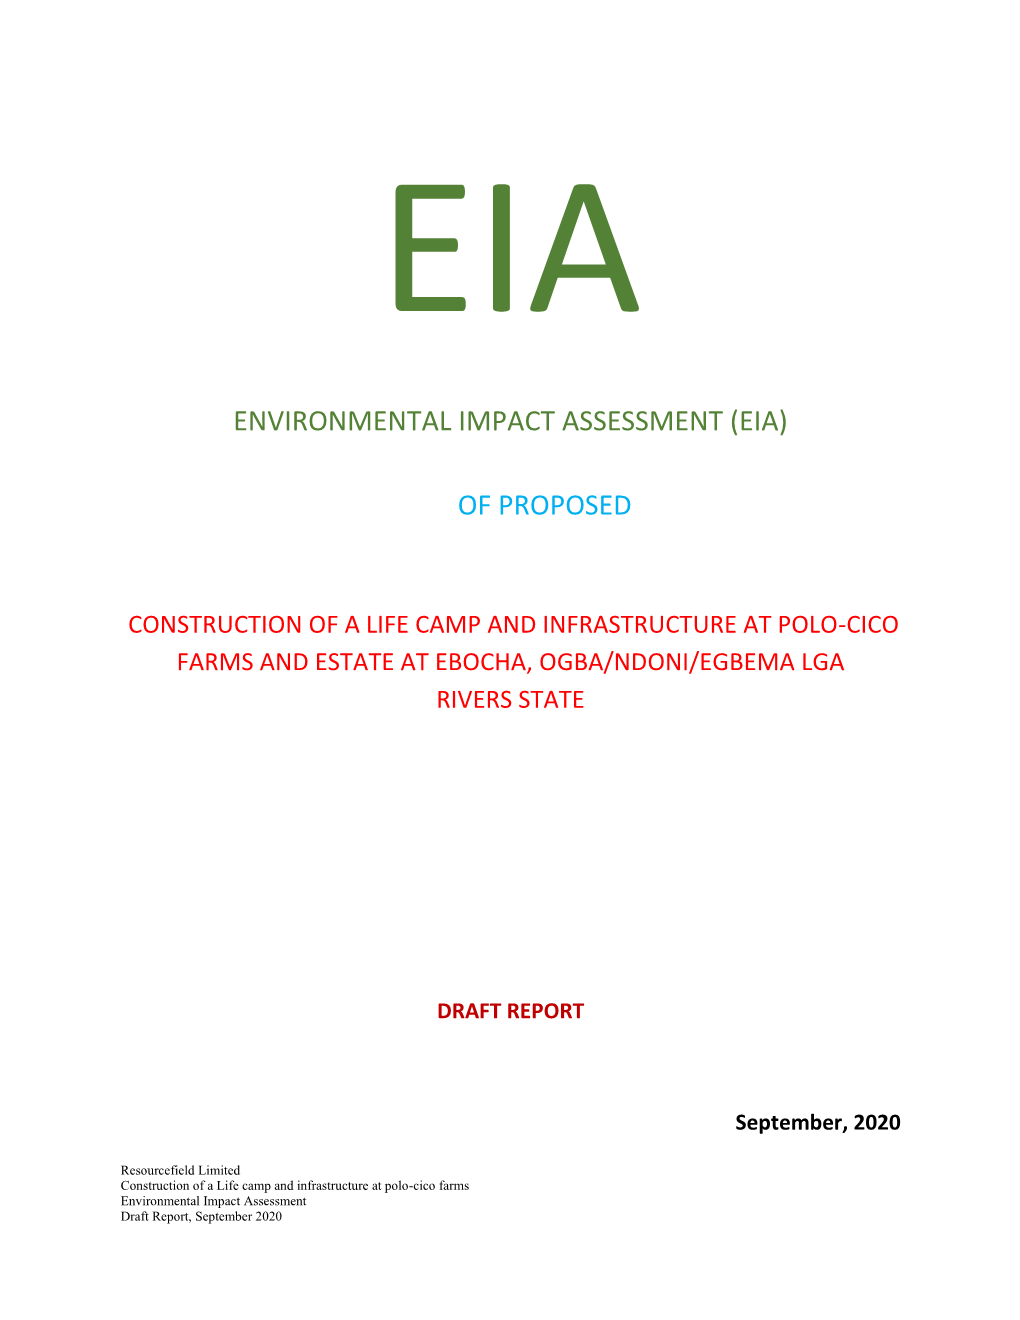 Environmental Impact Assessment (Eia) of Proposed